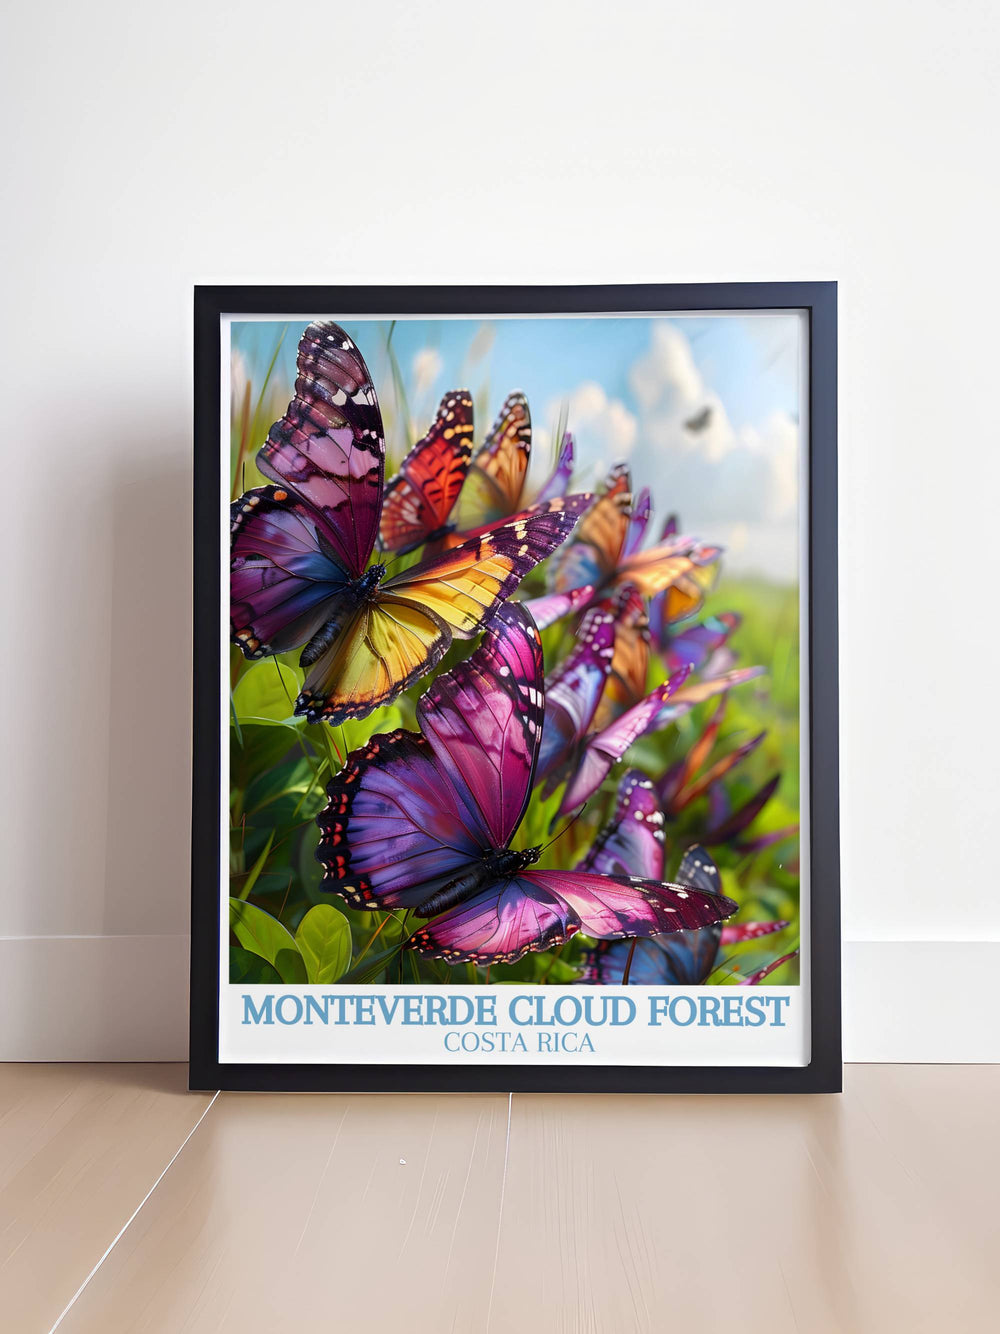 Framed art of the Monteverde Butterfly Garden showing detailed images of various butterfly species in their natural habitat.